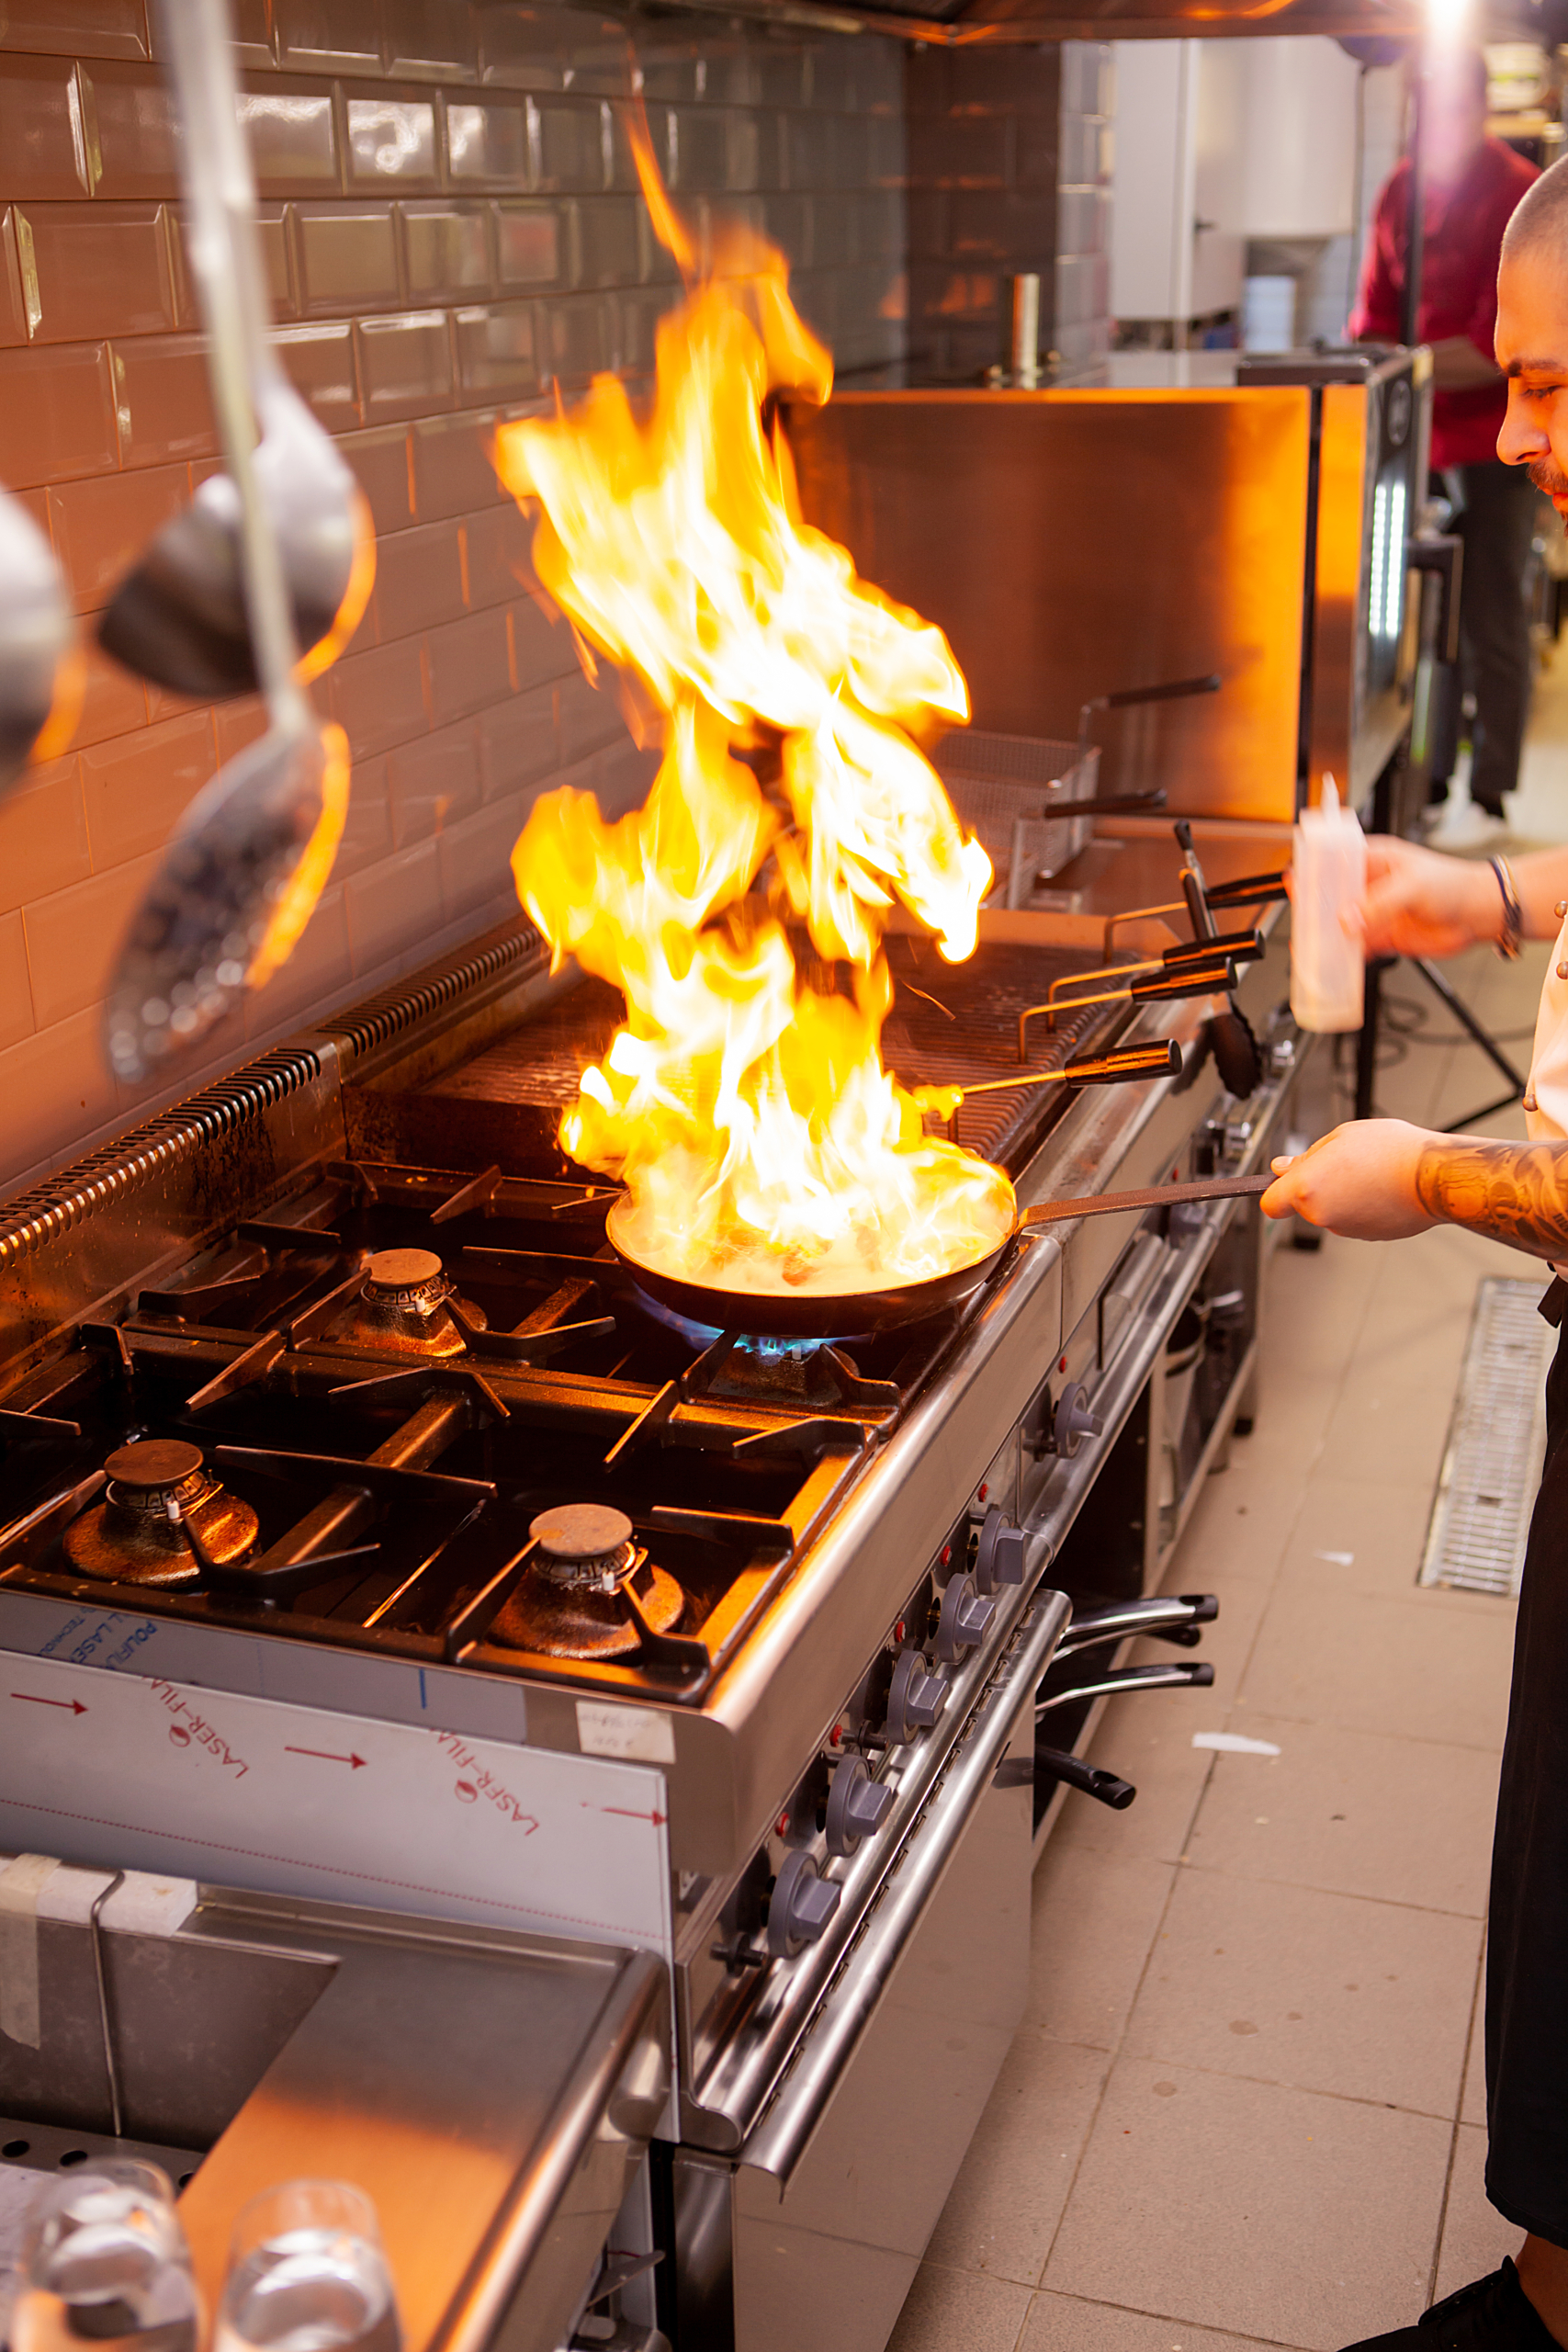 The chef prepares the dish on the stove with an open fire in the kitchen of the restaurant.